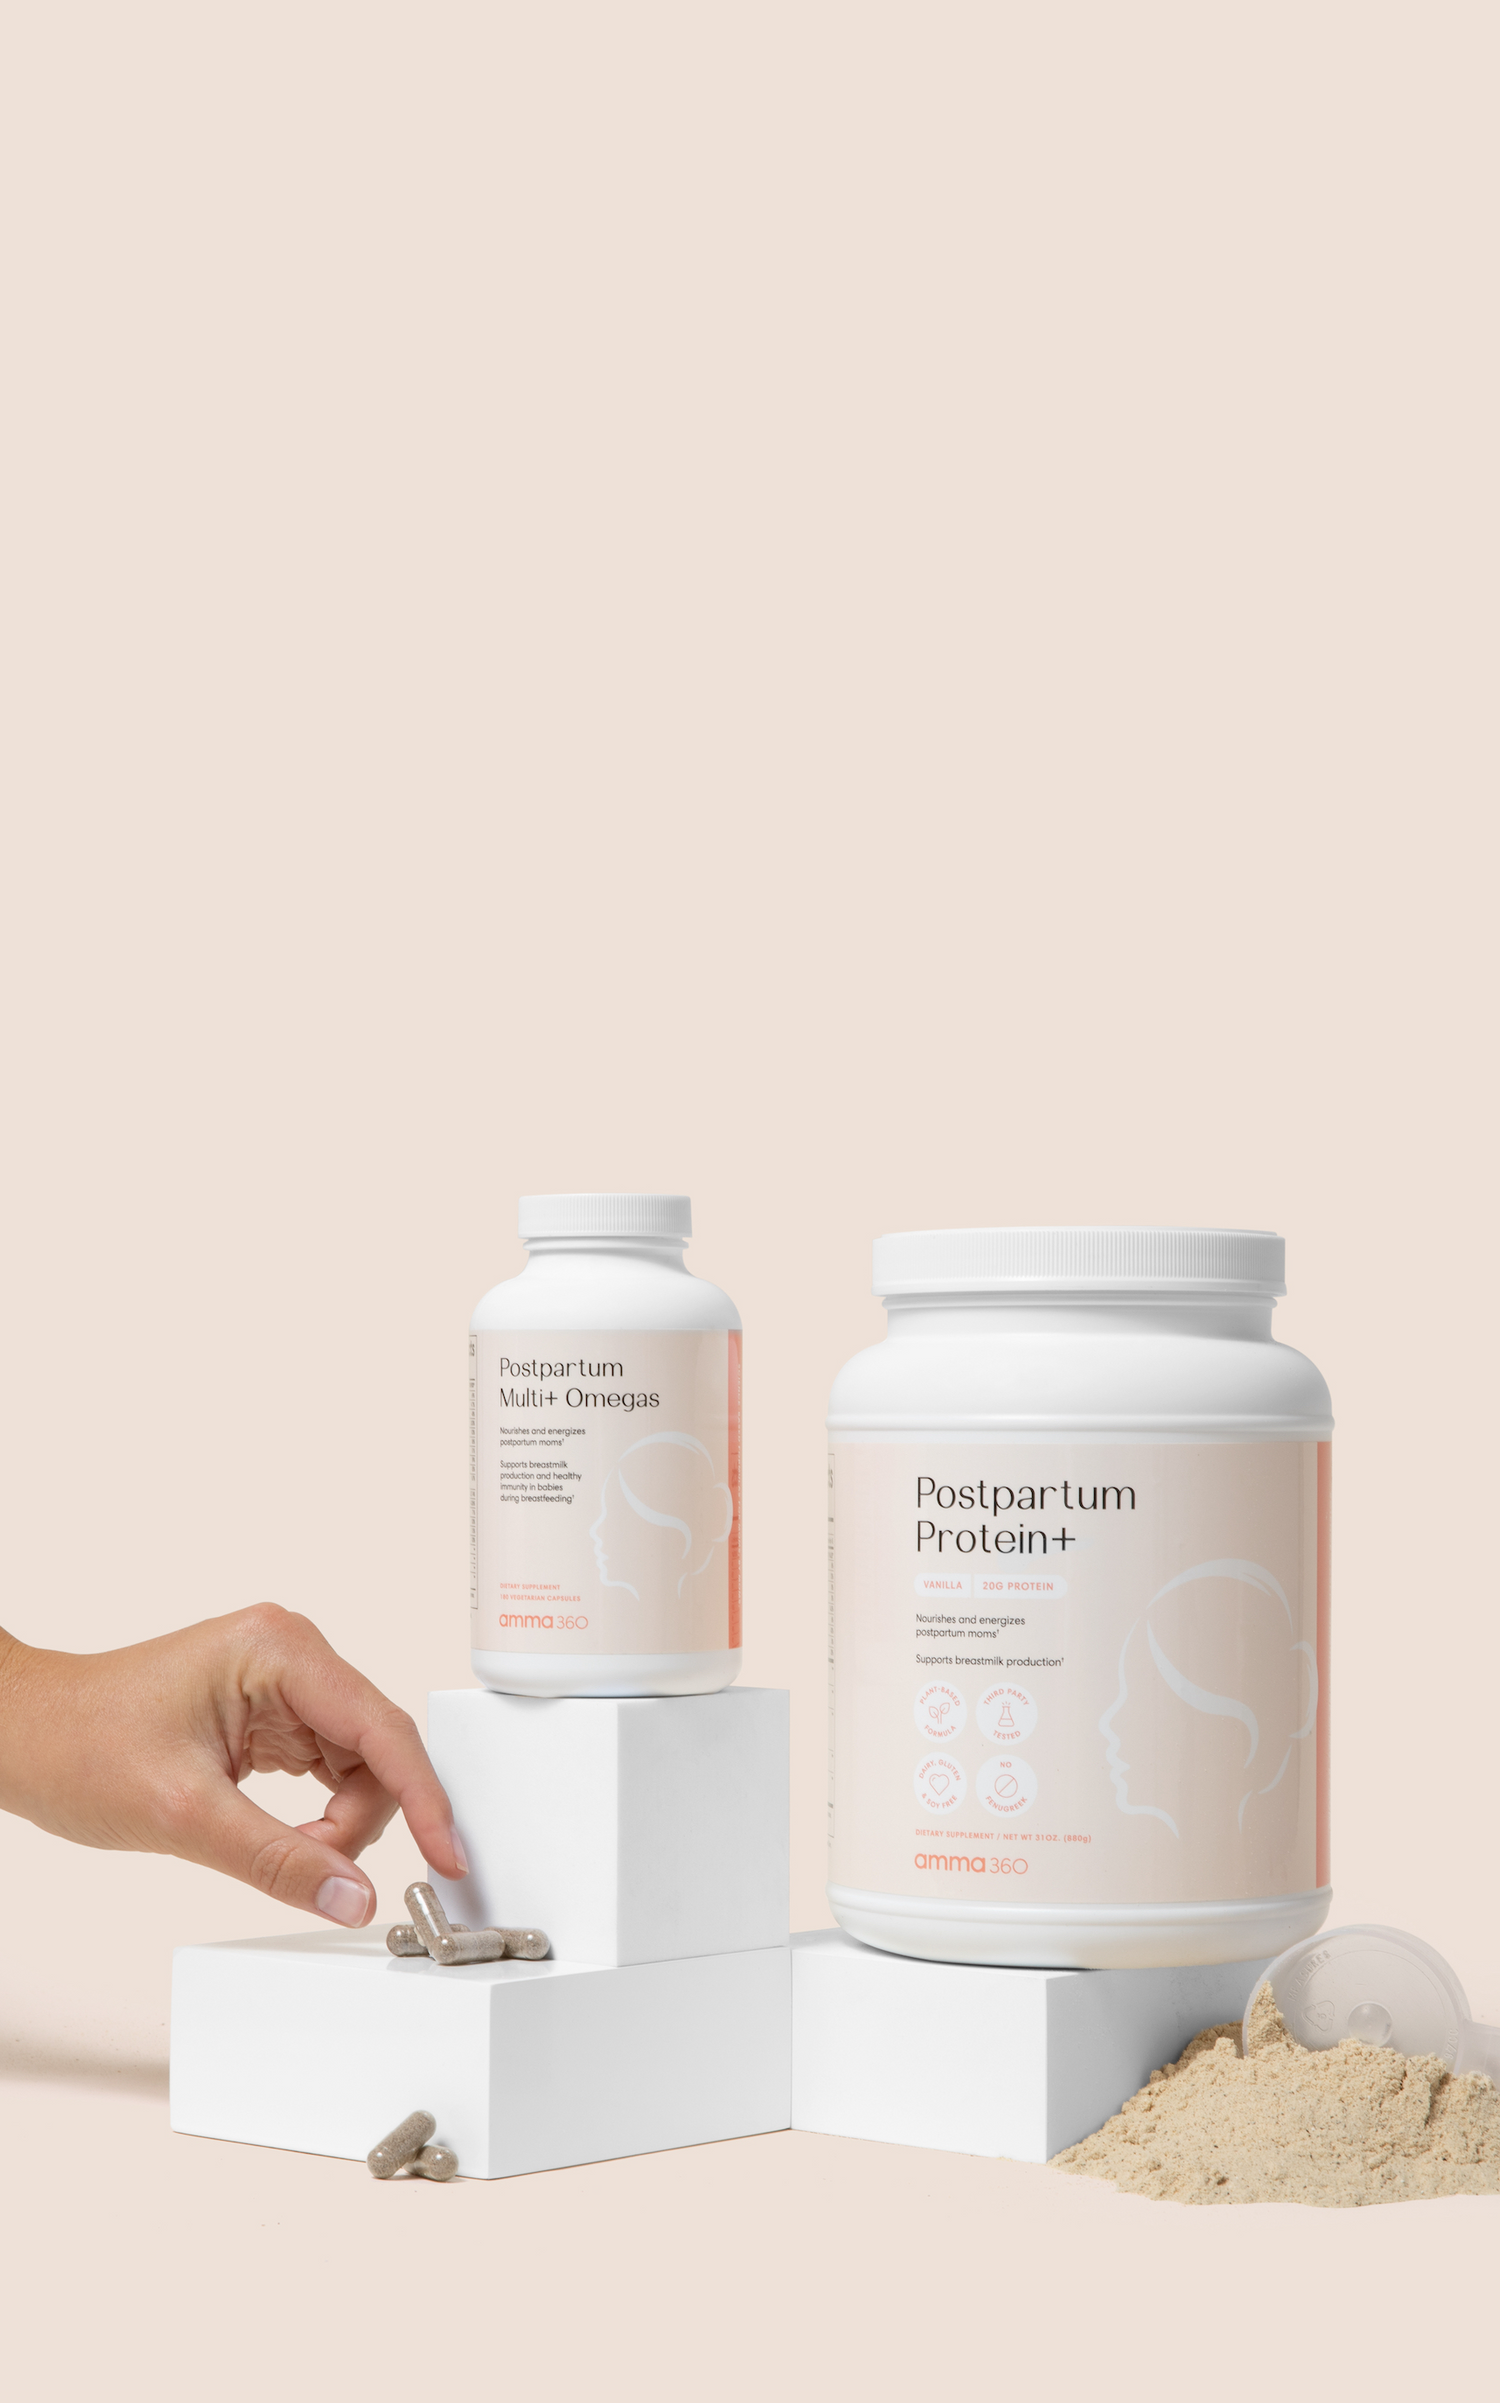 Postpartum product bundle image with hand reaching for capsule and protein powder